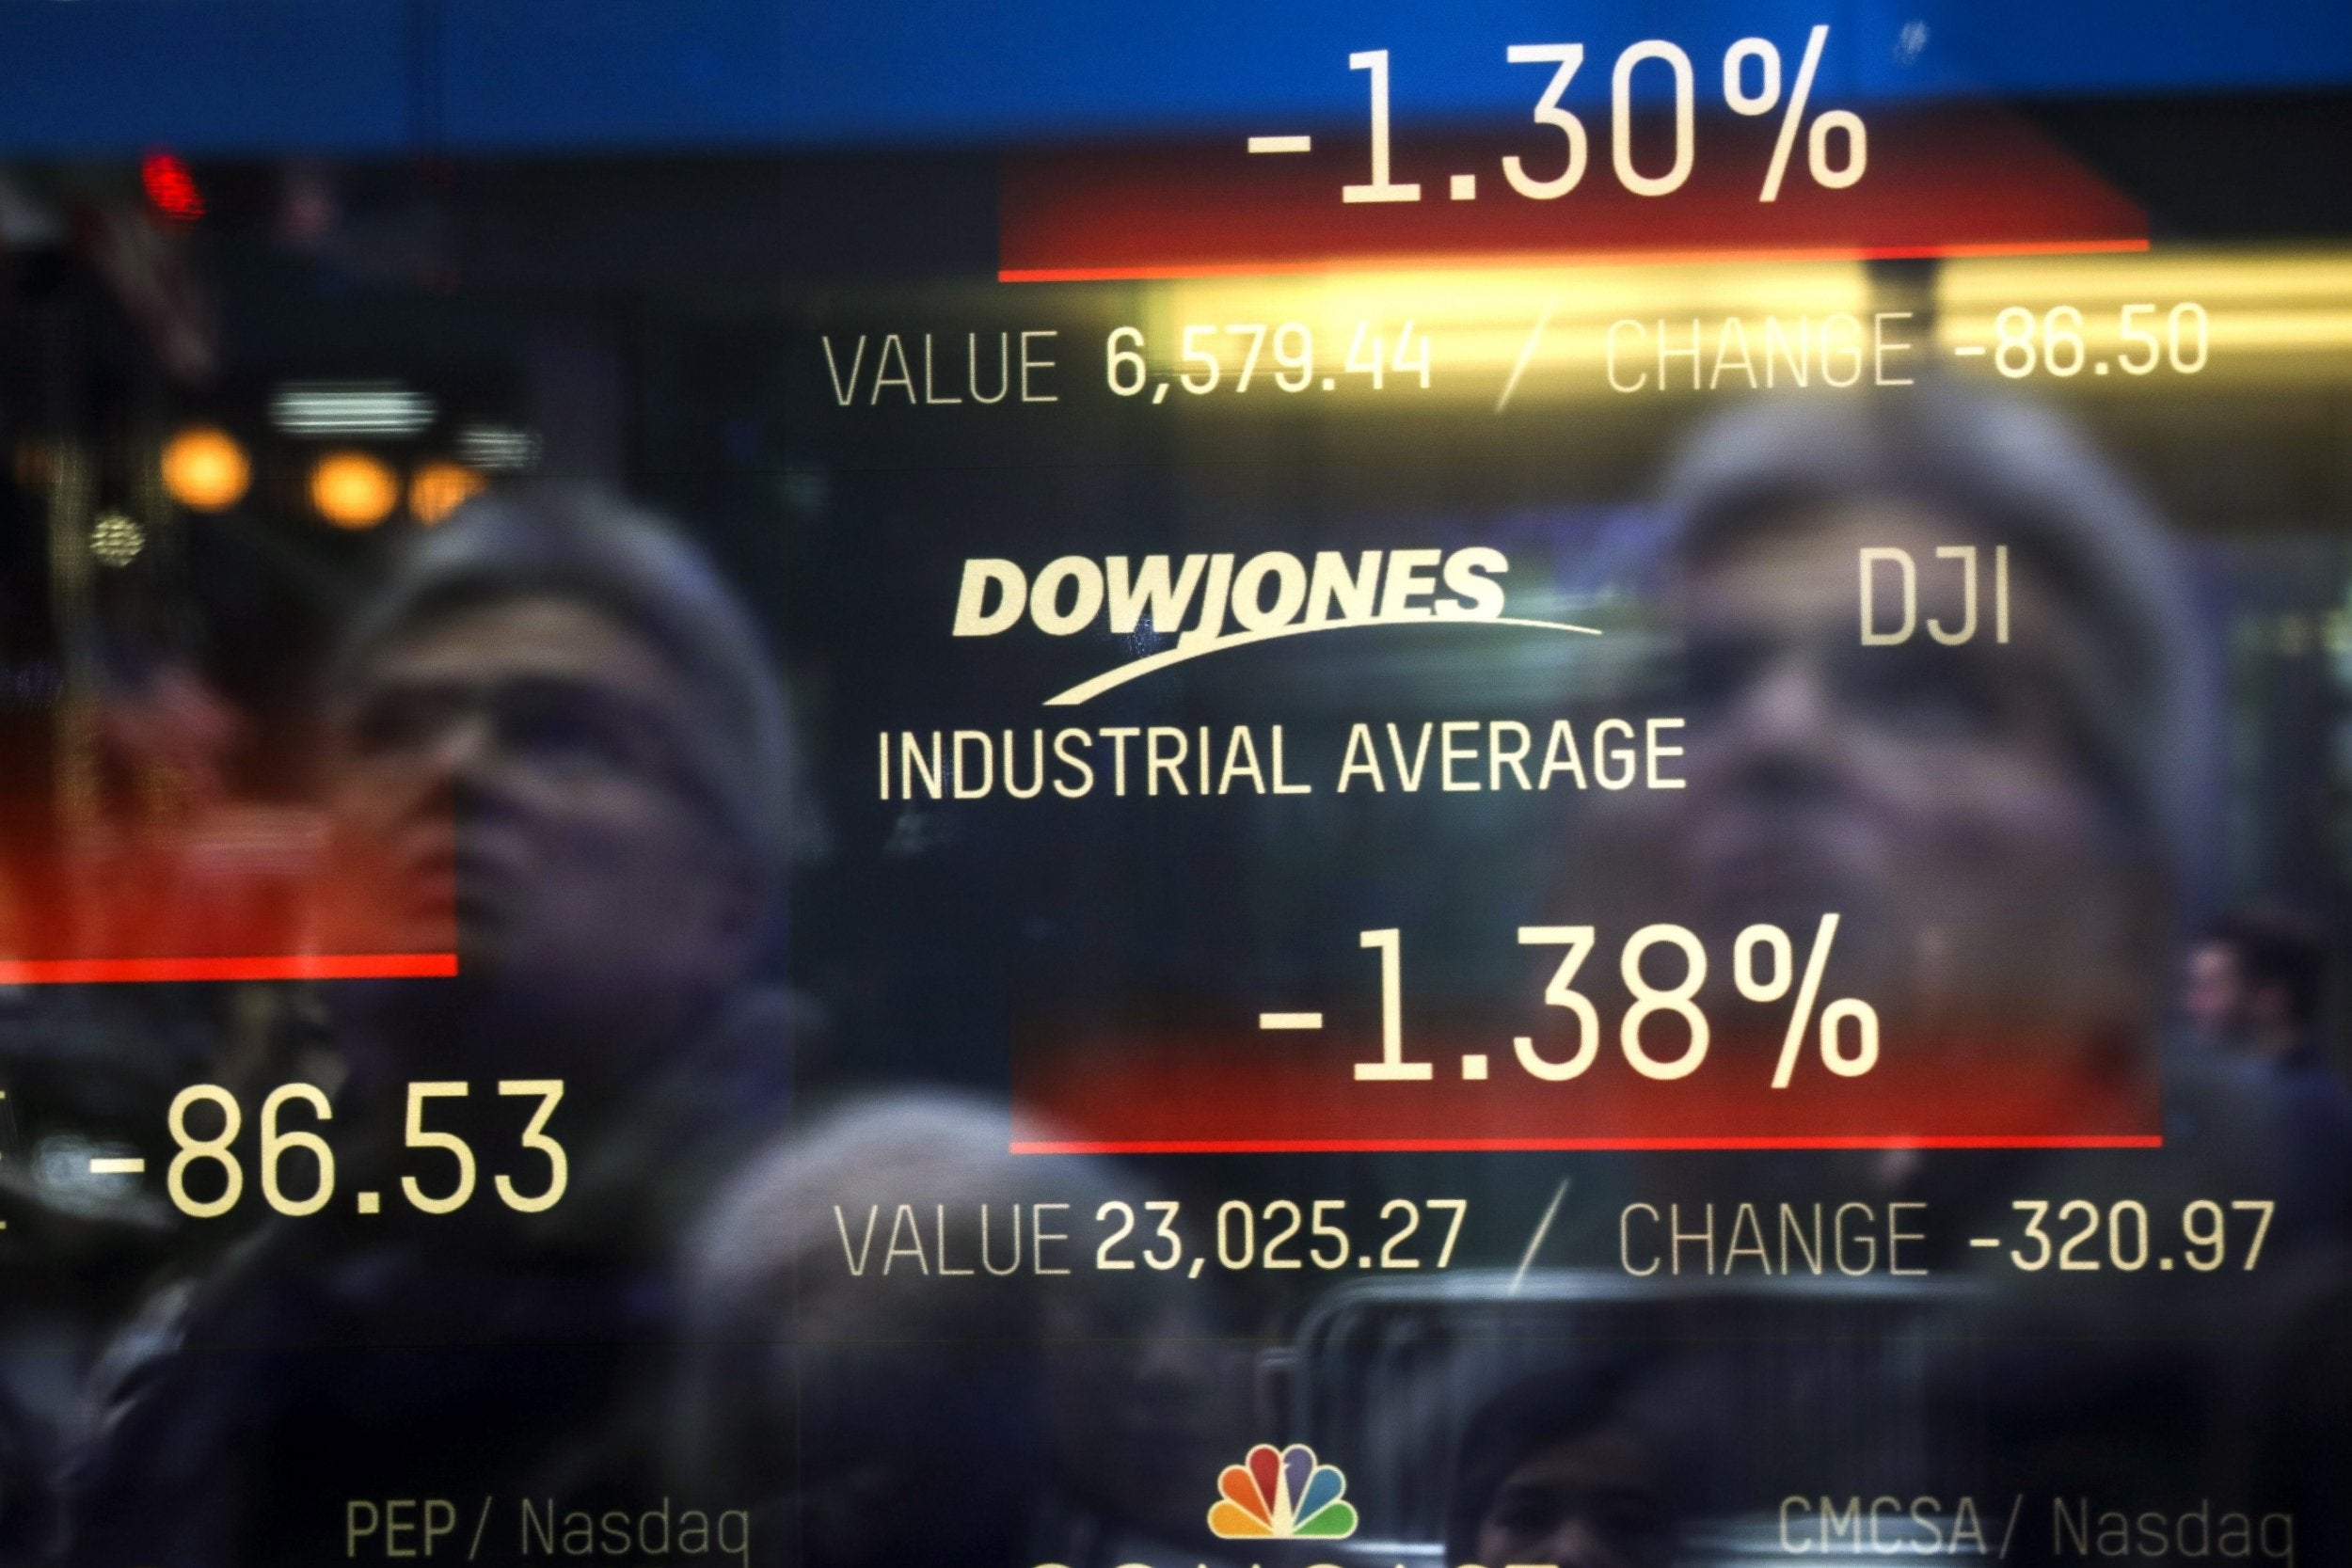 The day's numbers for the Dow Jones Industrial Average are displayed on a screen at the Nasdaq MarketSite in Times Square, New York, after Apple issued a profit warning